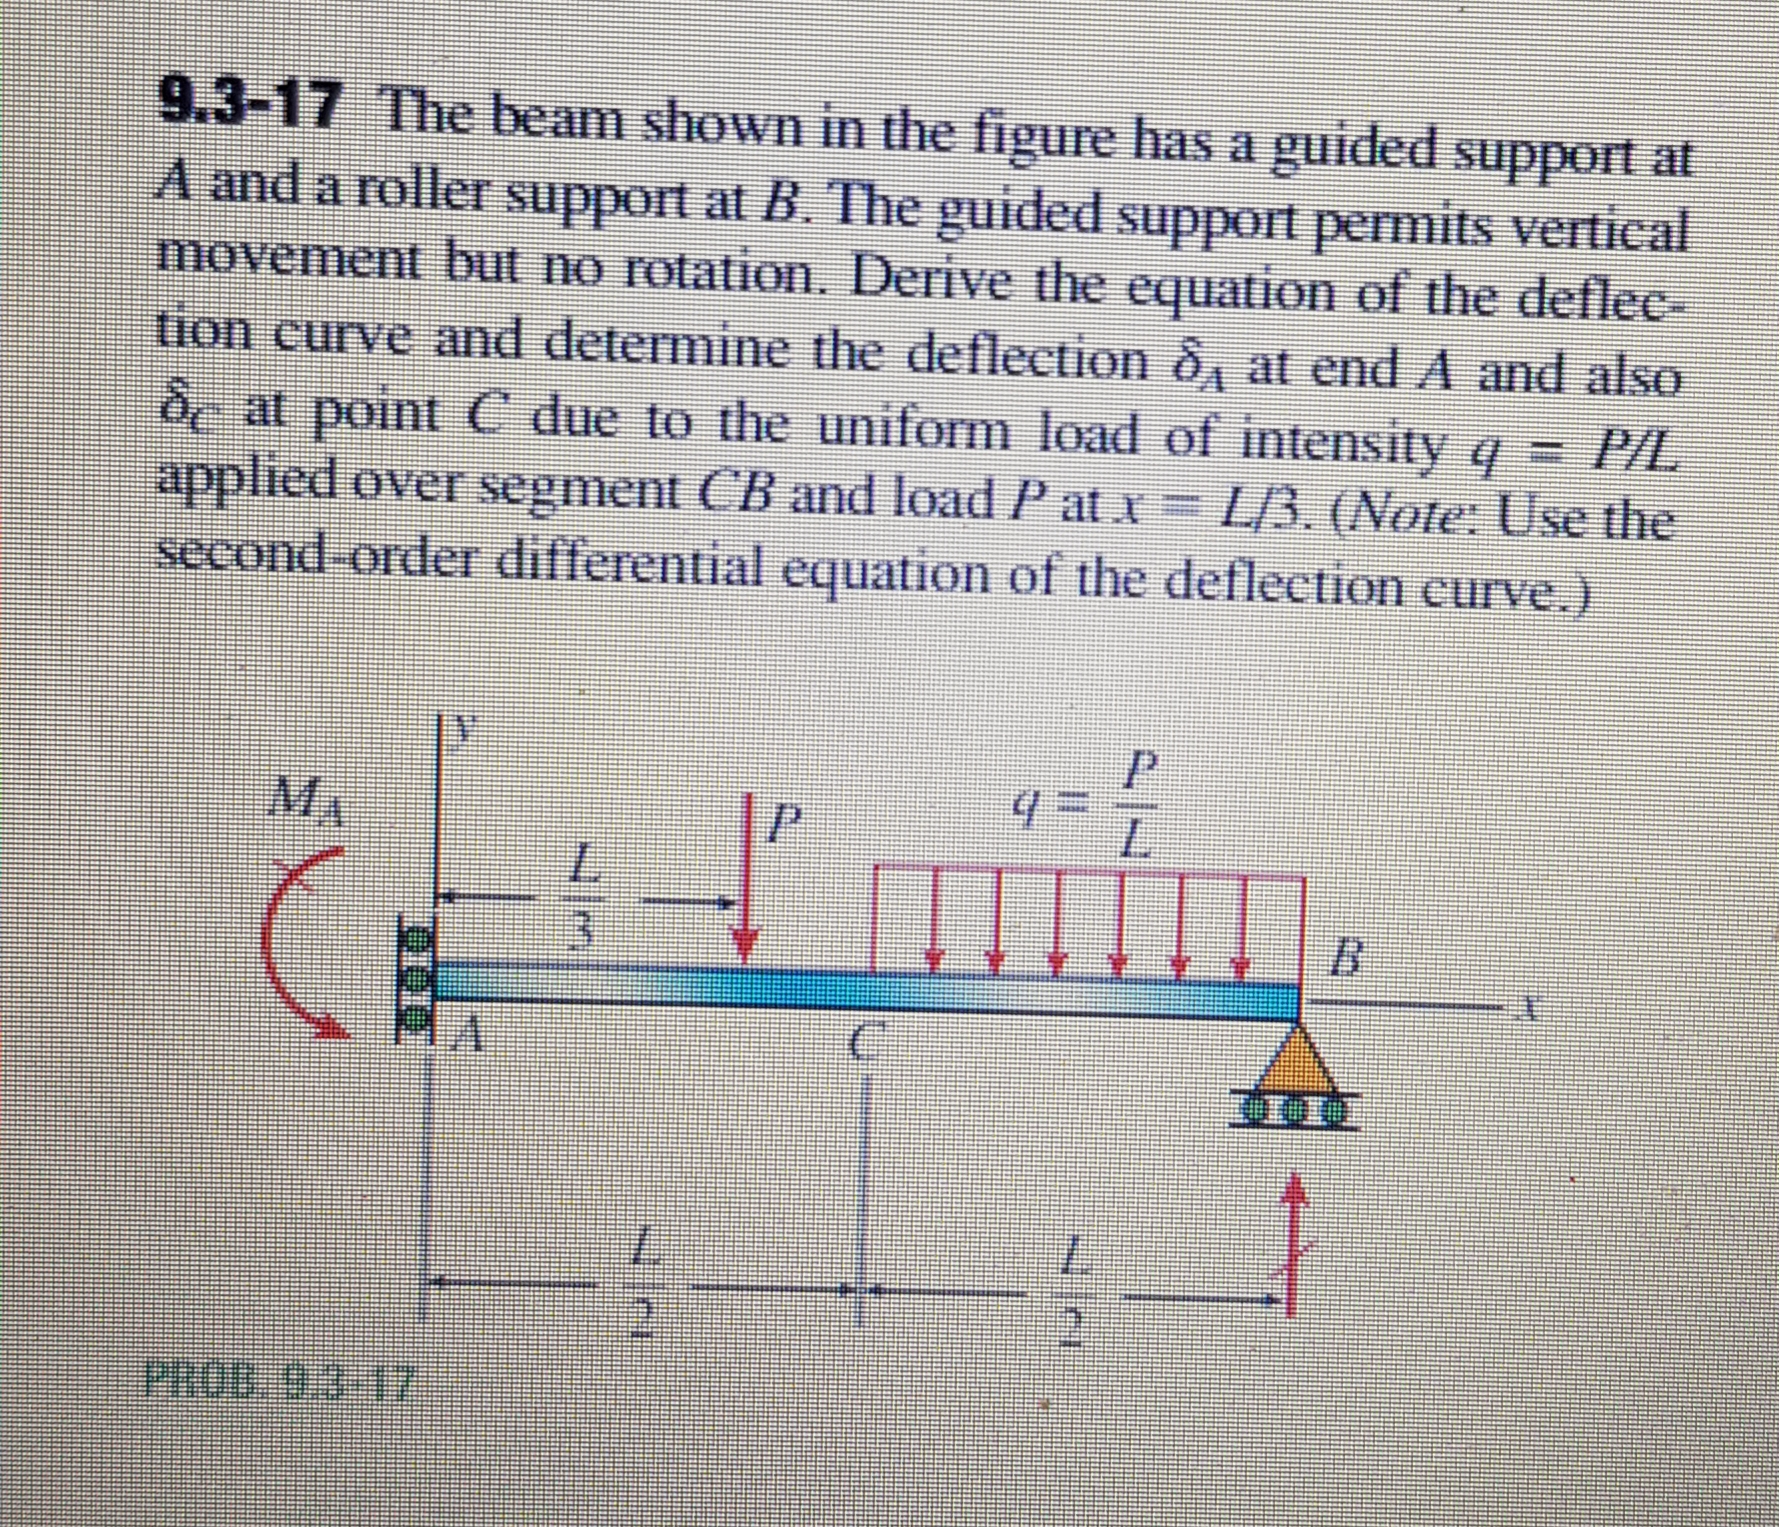 9.3-17 The beam shown in the figure has a guided suppot at
A and a roller support at B. The guided support permits vertical
movement but no rotation. Derive the equation of the deflec-
tion curve and determine the deflection ô, at end A and also
dc at point C due to the uniform load of intensity q PIL
applied over segment CB and load P at x = L/3. (Note: Use the
second order differential equation of the deflection curve.)
